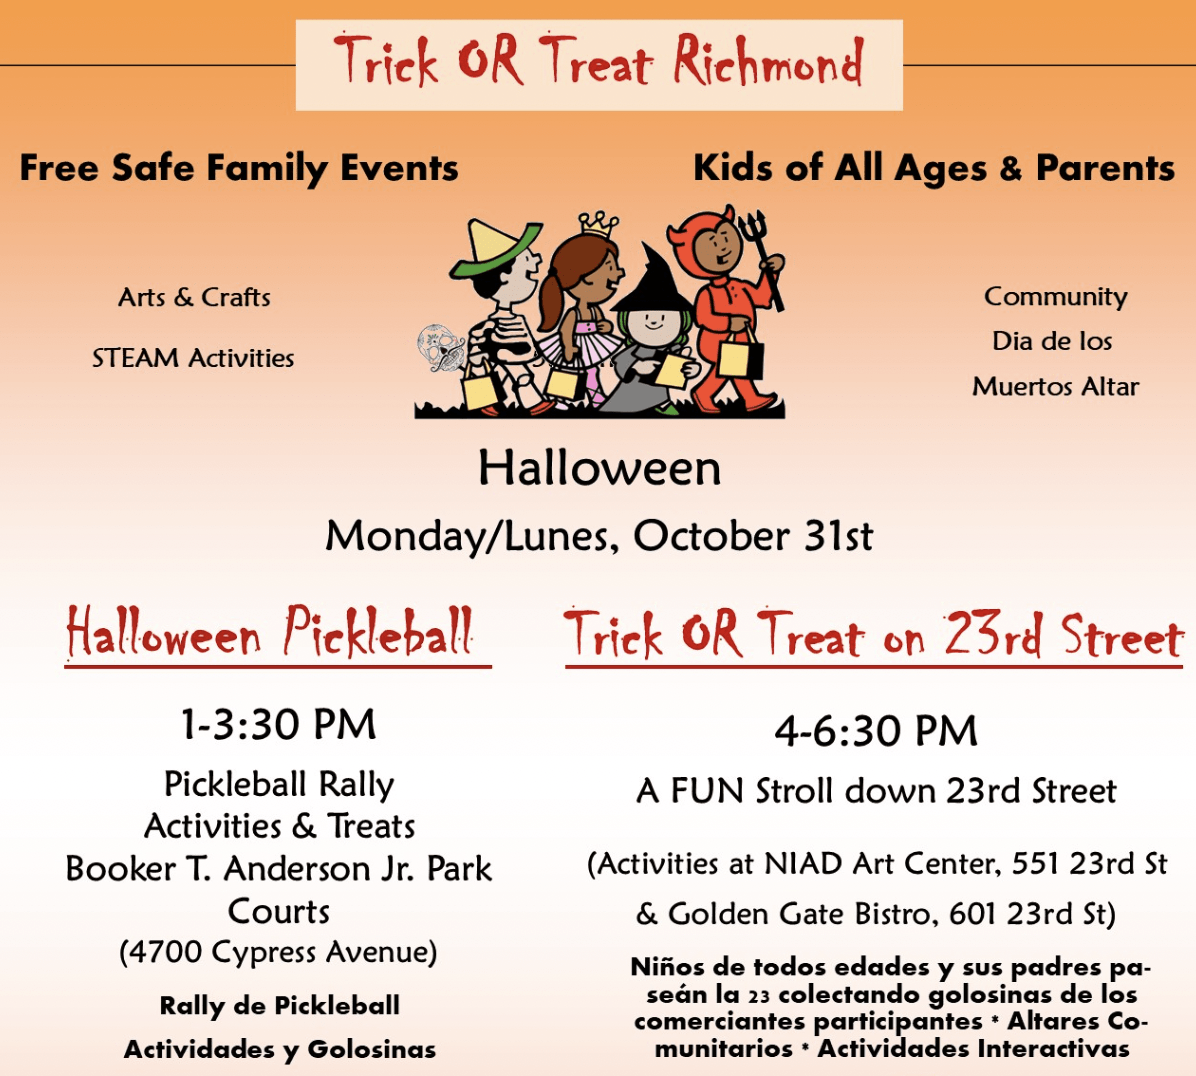 a flyer advertising "trick or treat richmond" with a cartoon of children trick or treating. All text is in event listing.